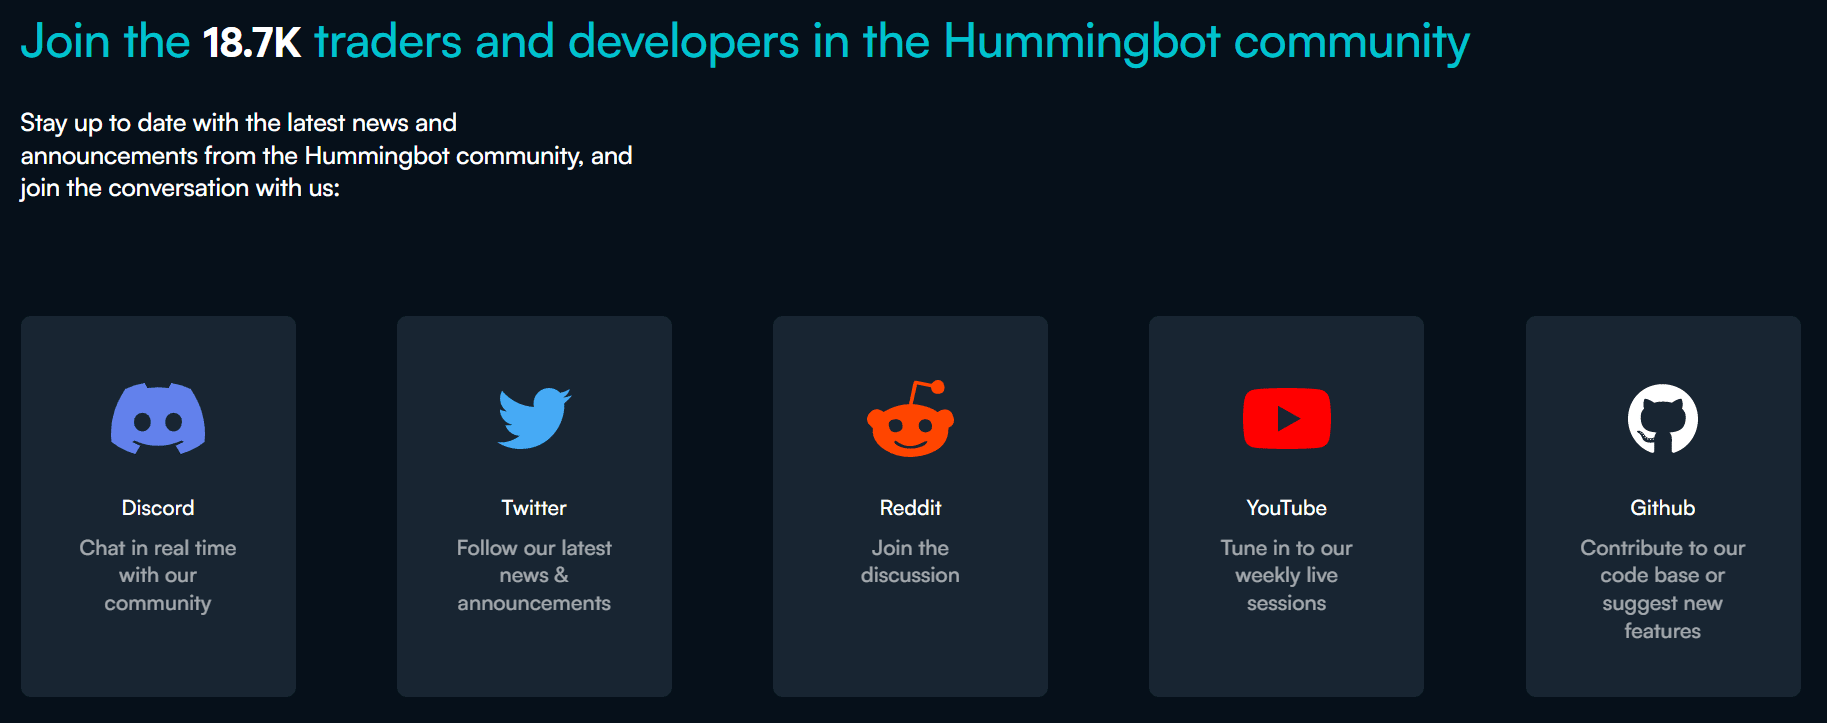  The five platforms to join the Hummingbot community